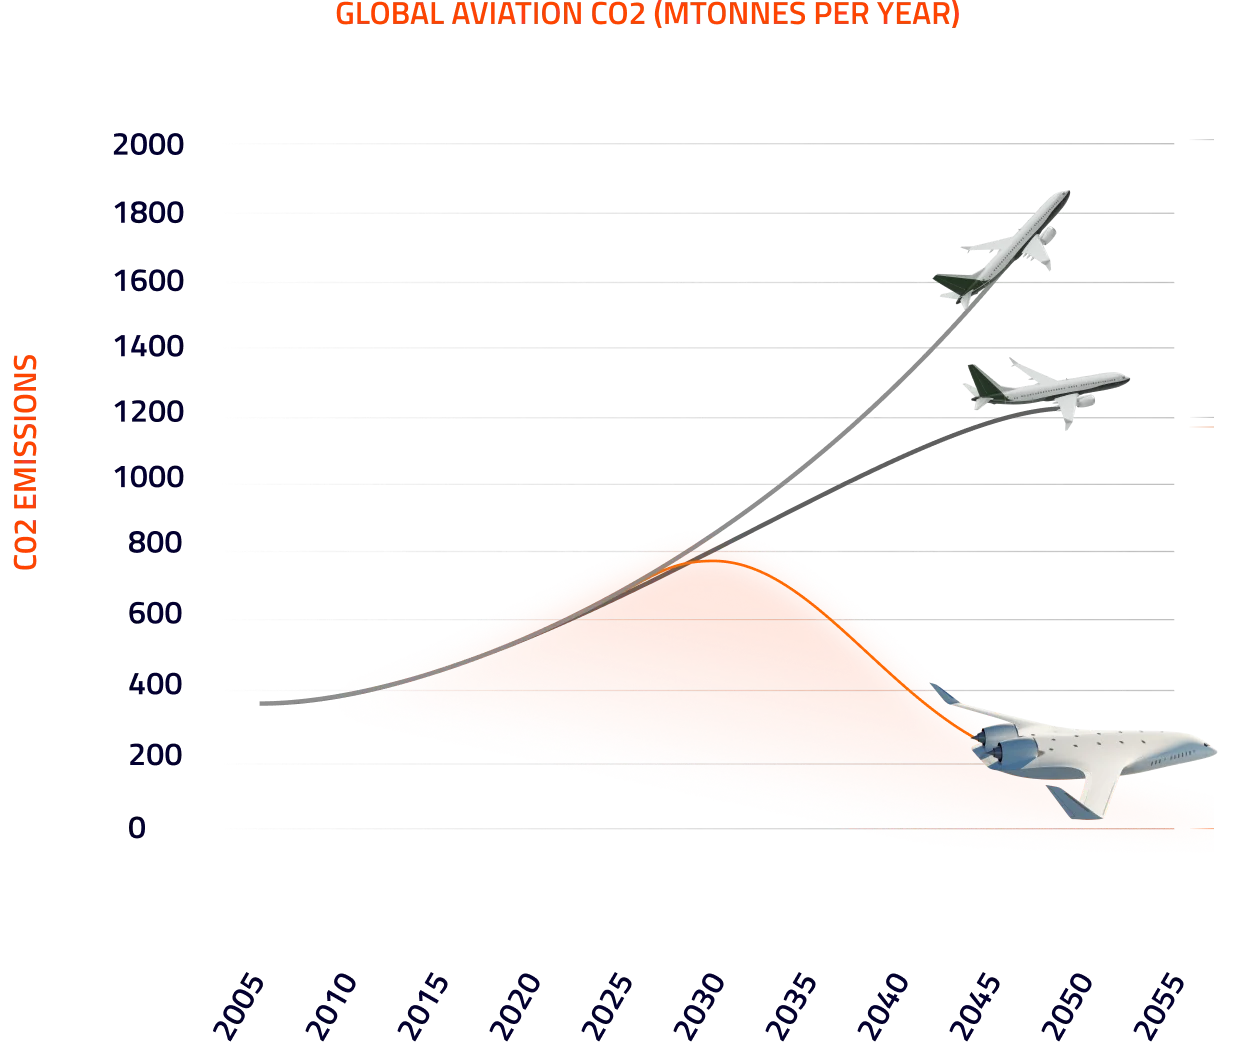 Aviation carbon emissions per year